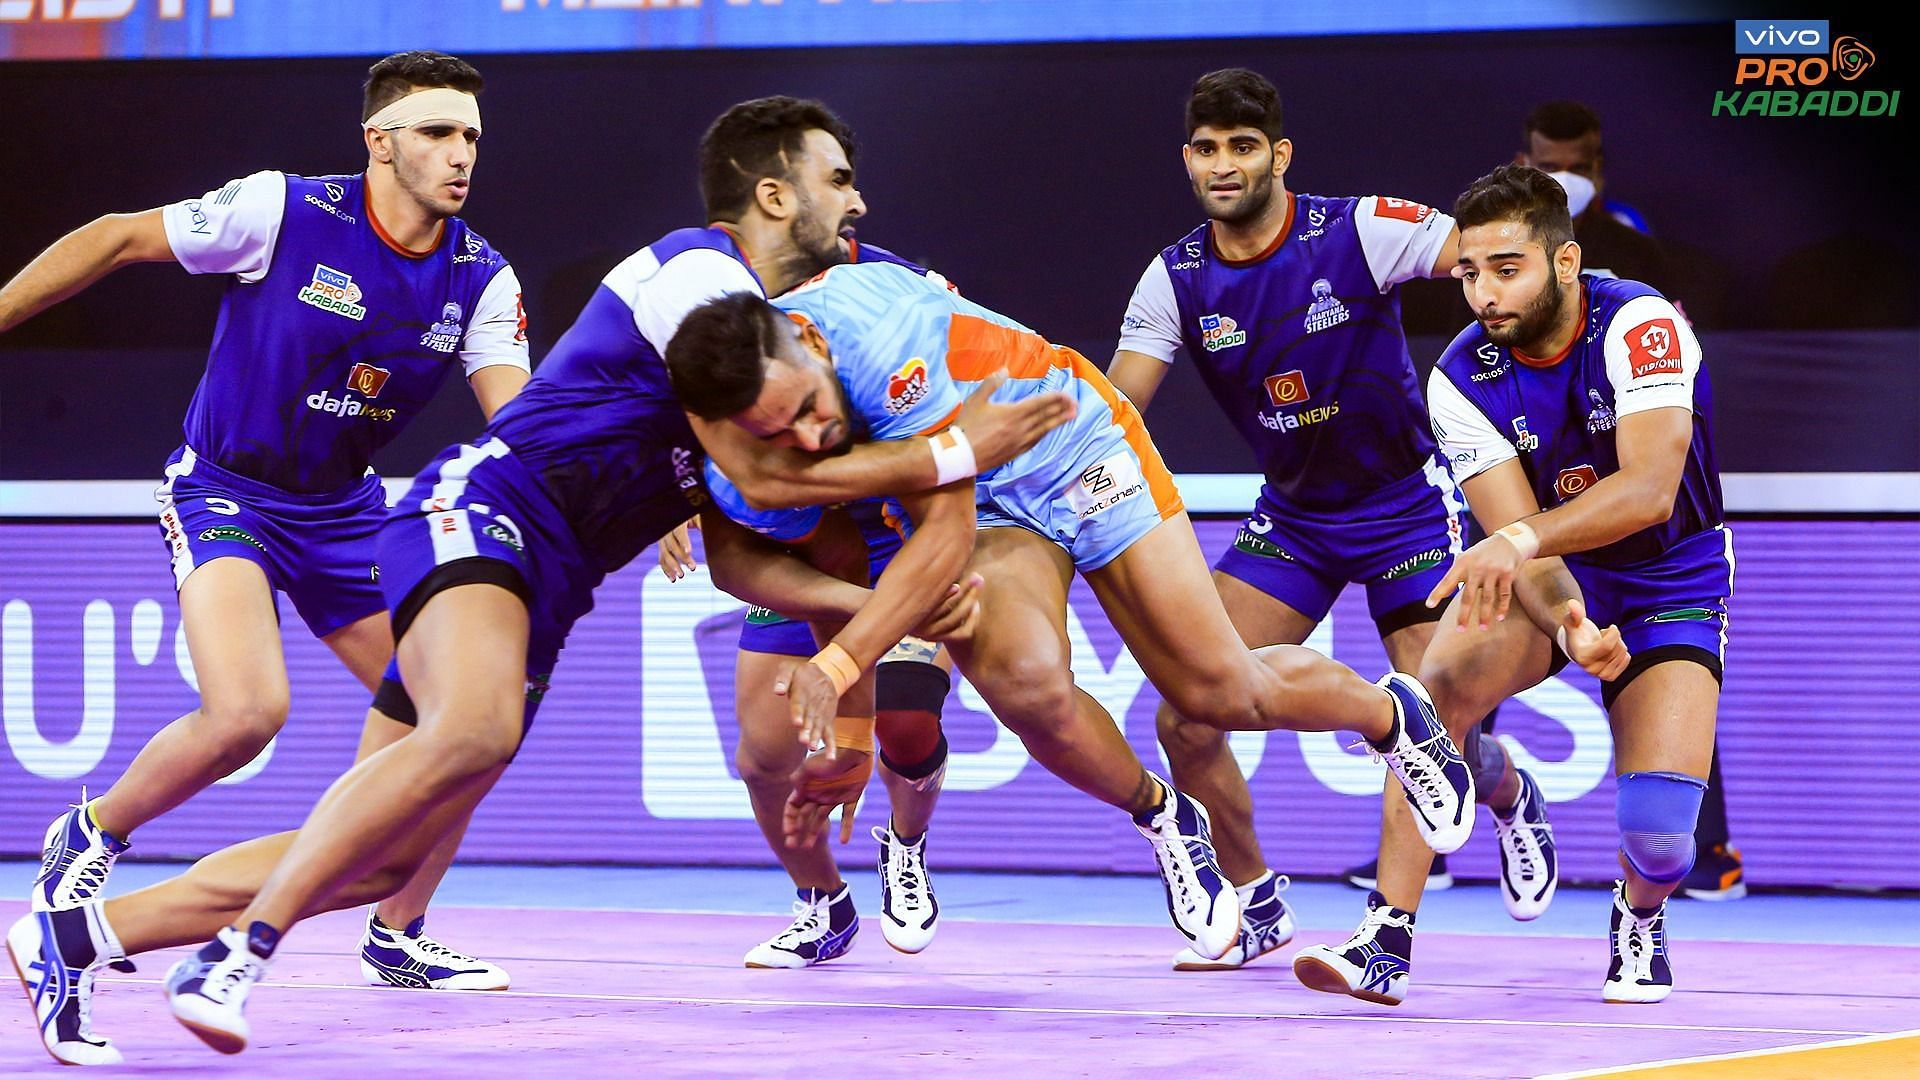 Haryana Steelers and Bengal Warriors will play multiple matches between February 5 to 13 (Image Courtesy: Pro Kabaddi/Facebook)